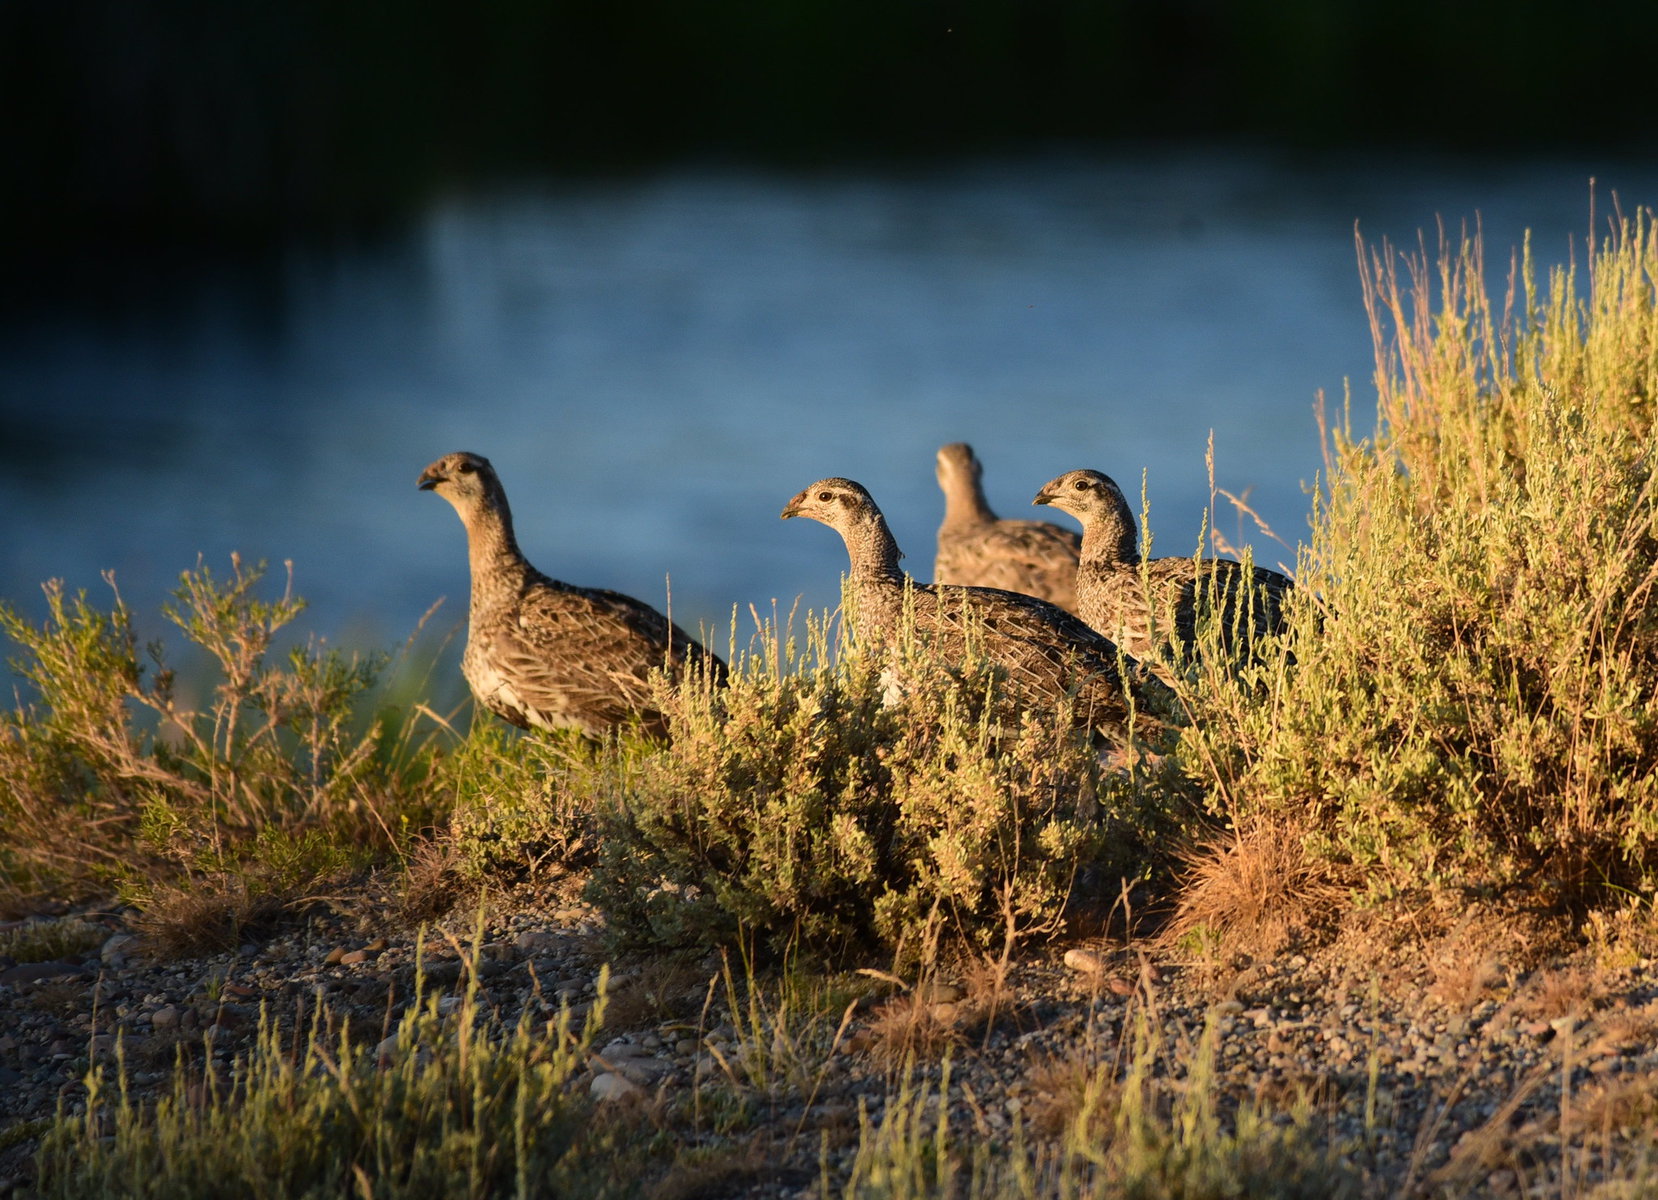 A group of sage grouse in grass.